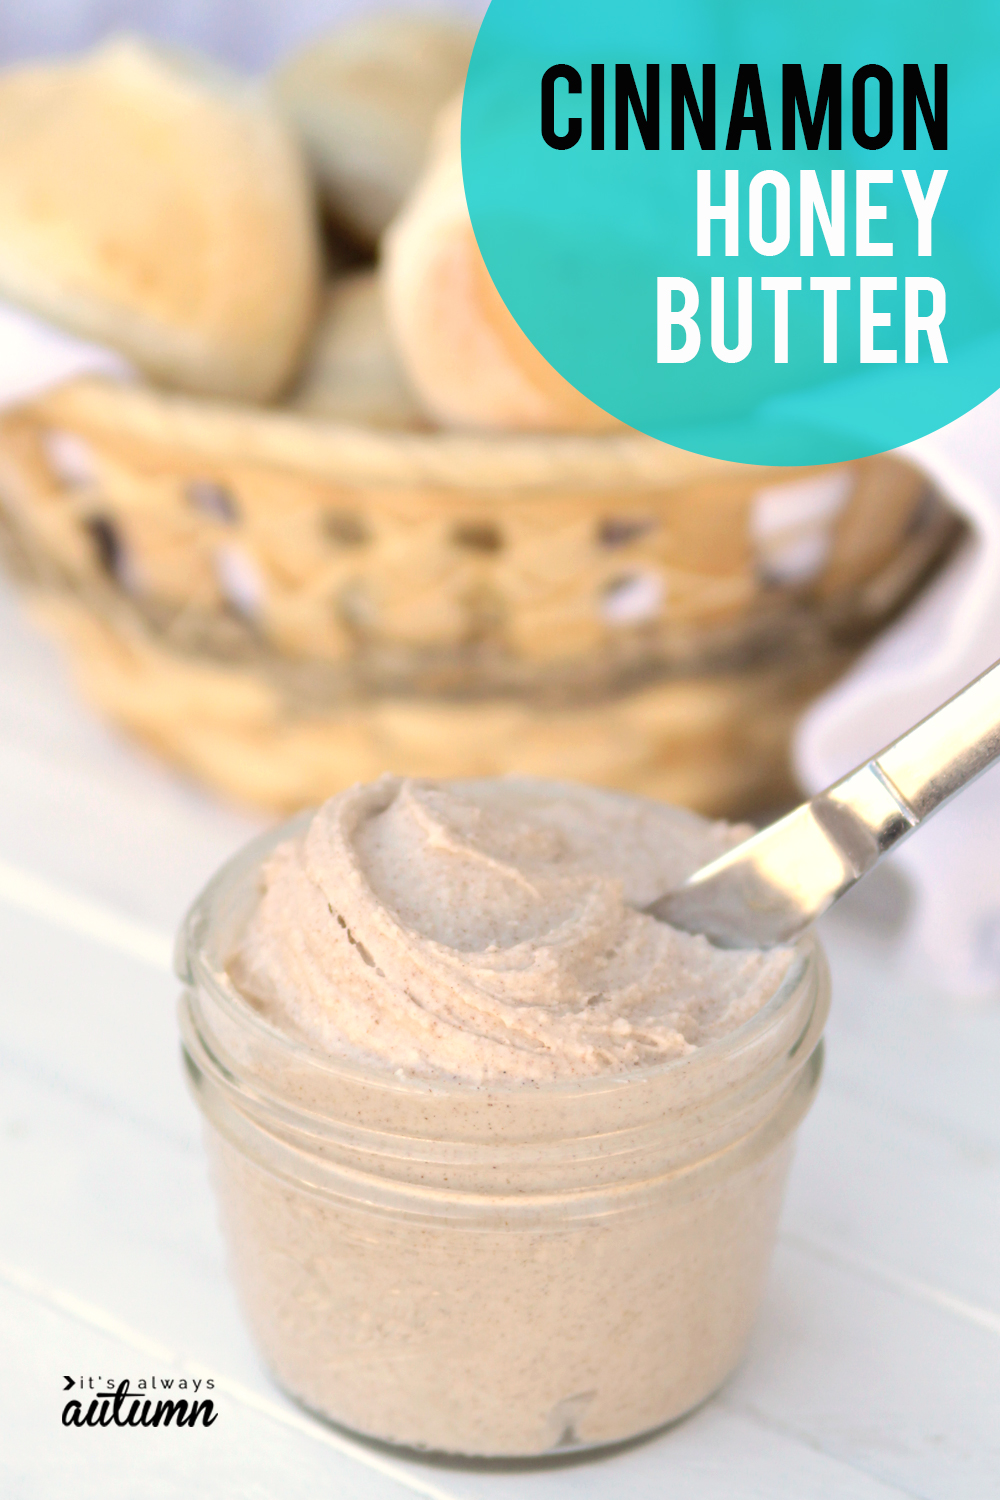 This cinnamon honey butter is absolutely delicious on roll, toast, pancakes, sweet potatoes and more!